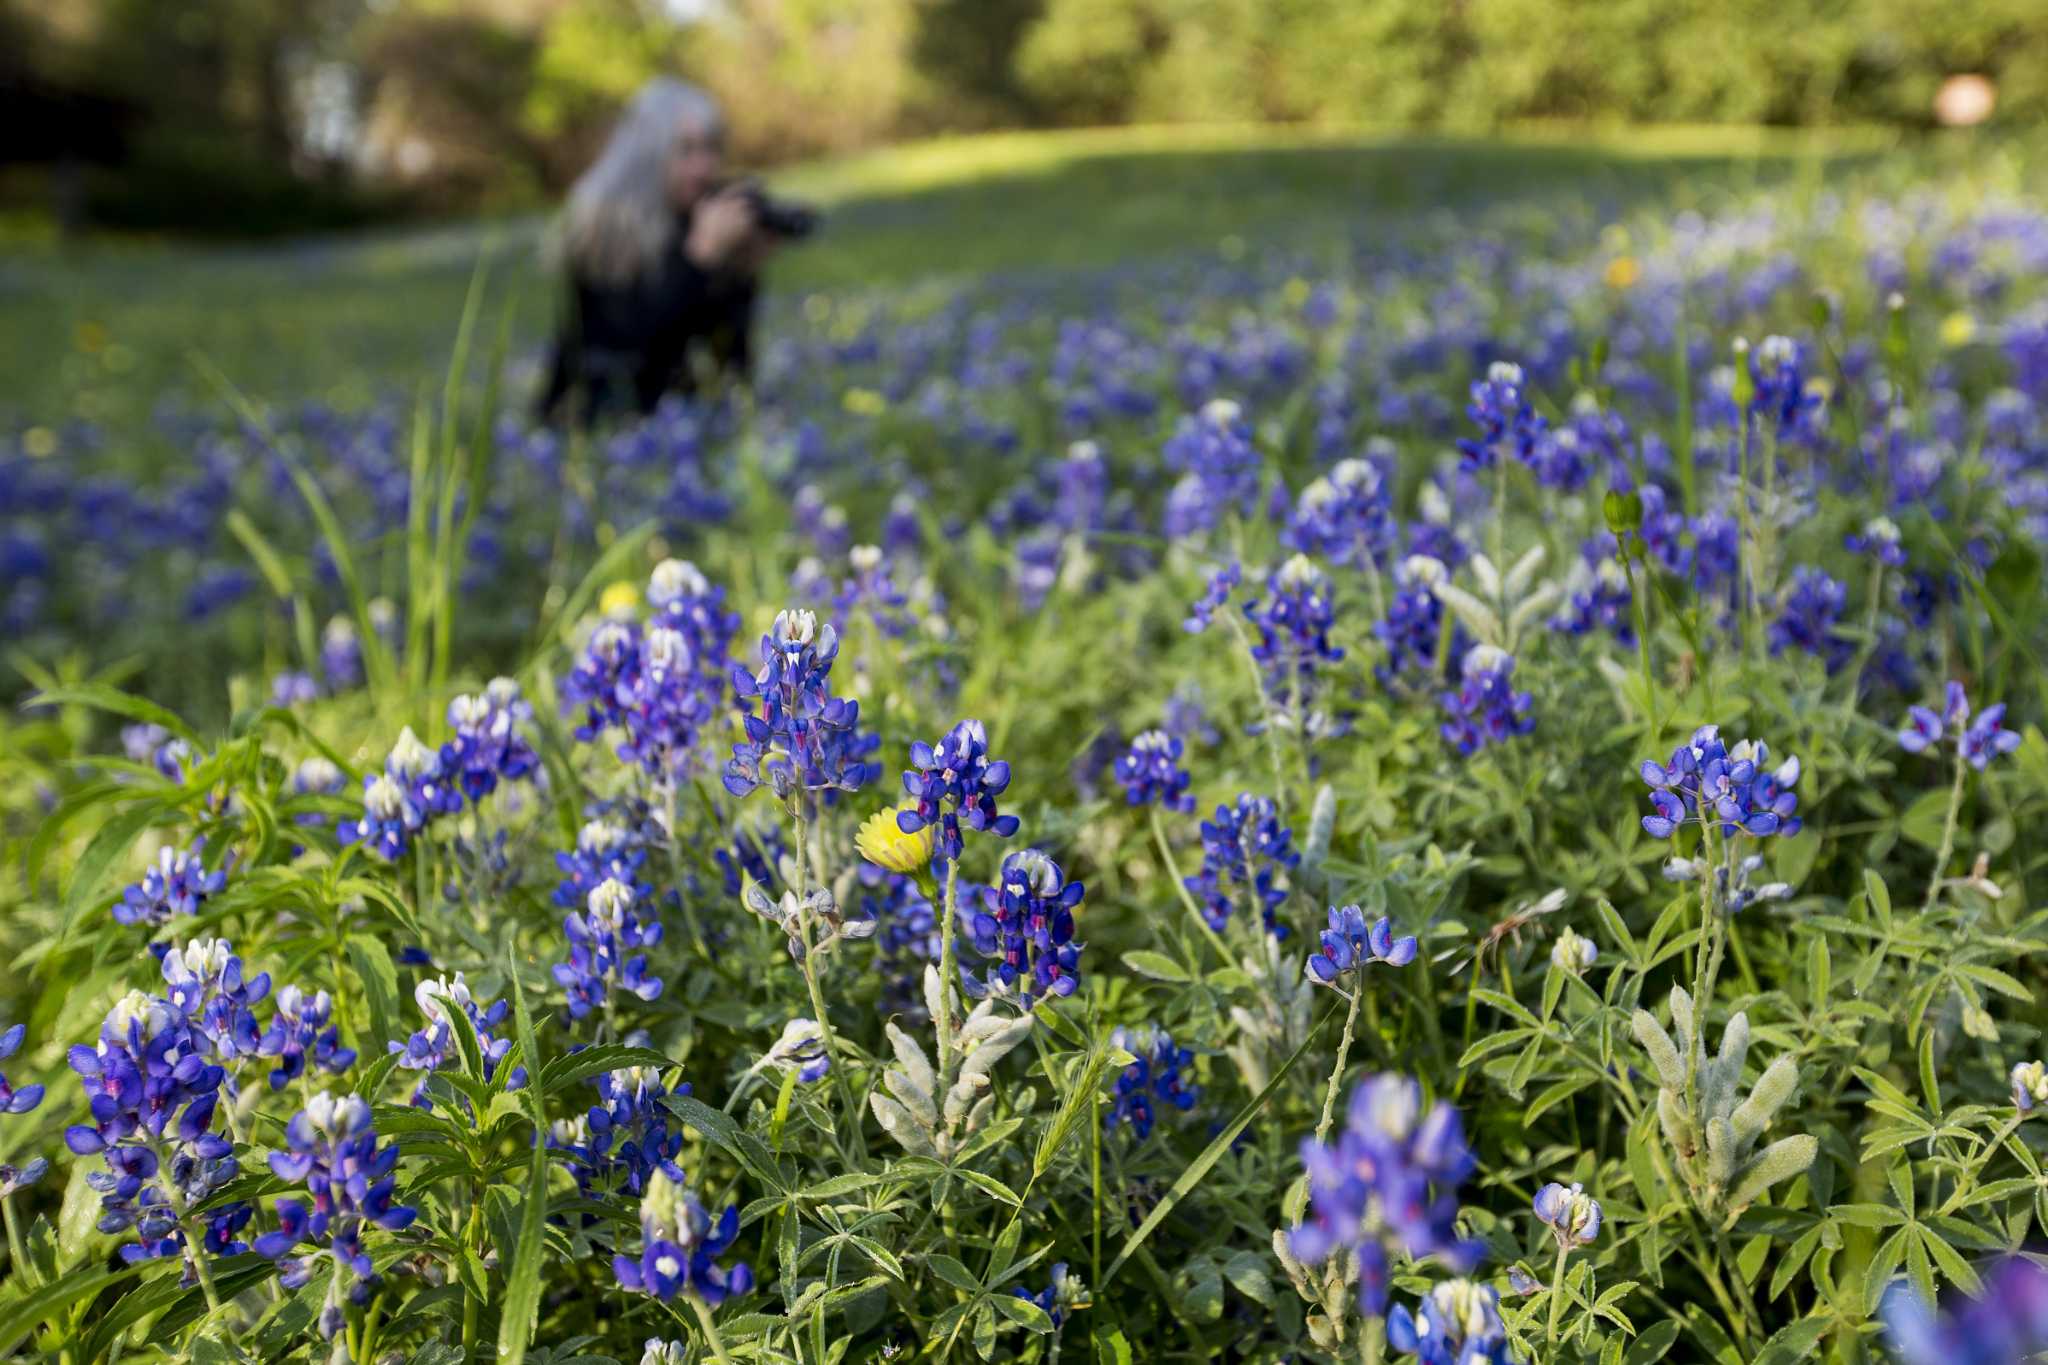 Blue Beauties Bluebonnets Are Starting To Pop Up Across Texas